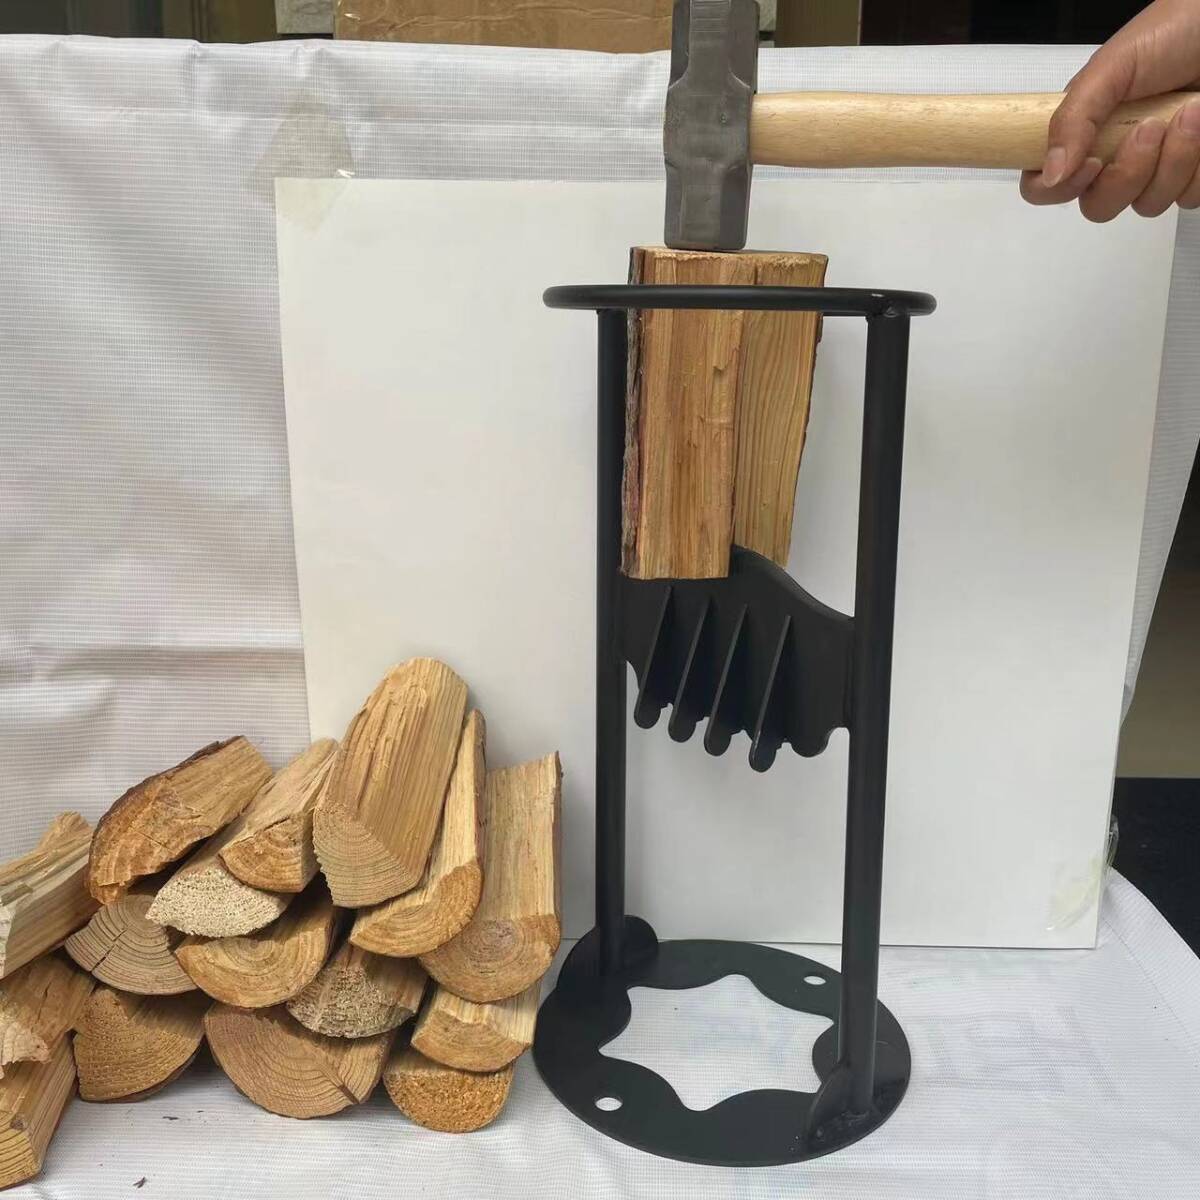 * firewood tenth pcs firewood tenth machine firewood tenth vessel wood chopper .. fire .... wood stove camp outdoor fireplace gold do ring cracker fixation hole equipped 